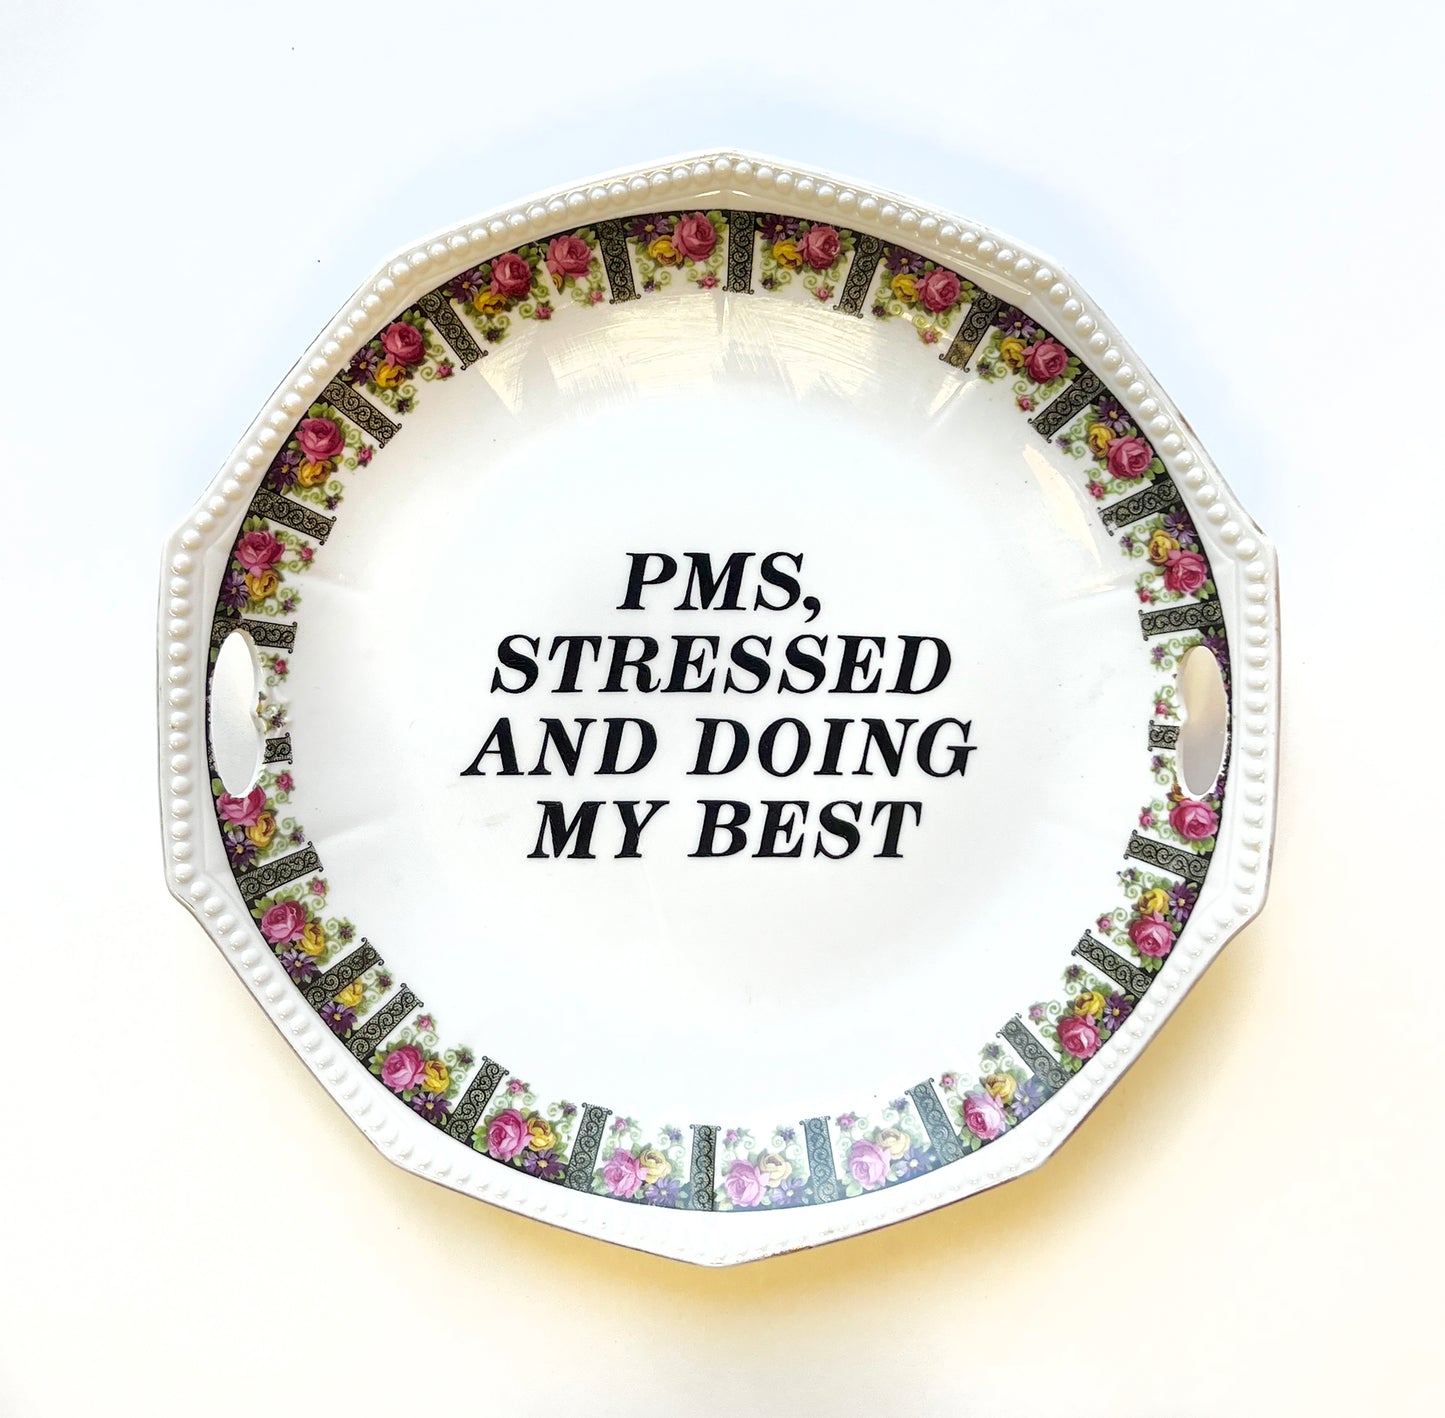  by Marie-Claude Marquis titled Marie-Claude Marquis - "PMS, Stressed And Doing My Best"